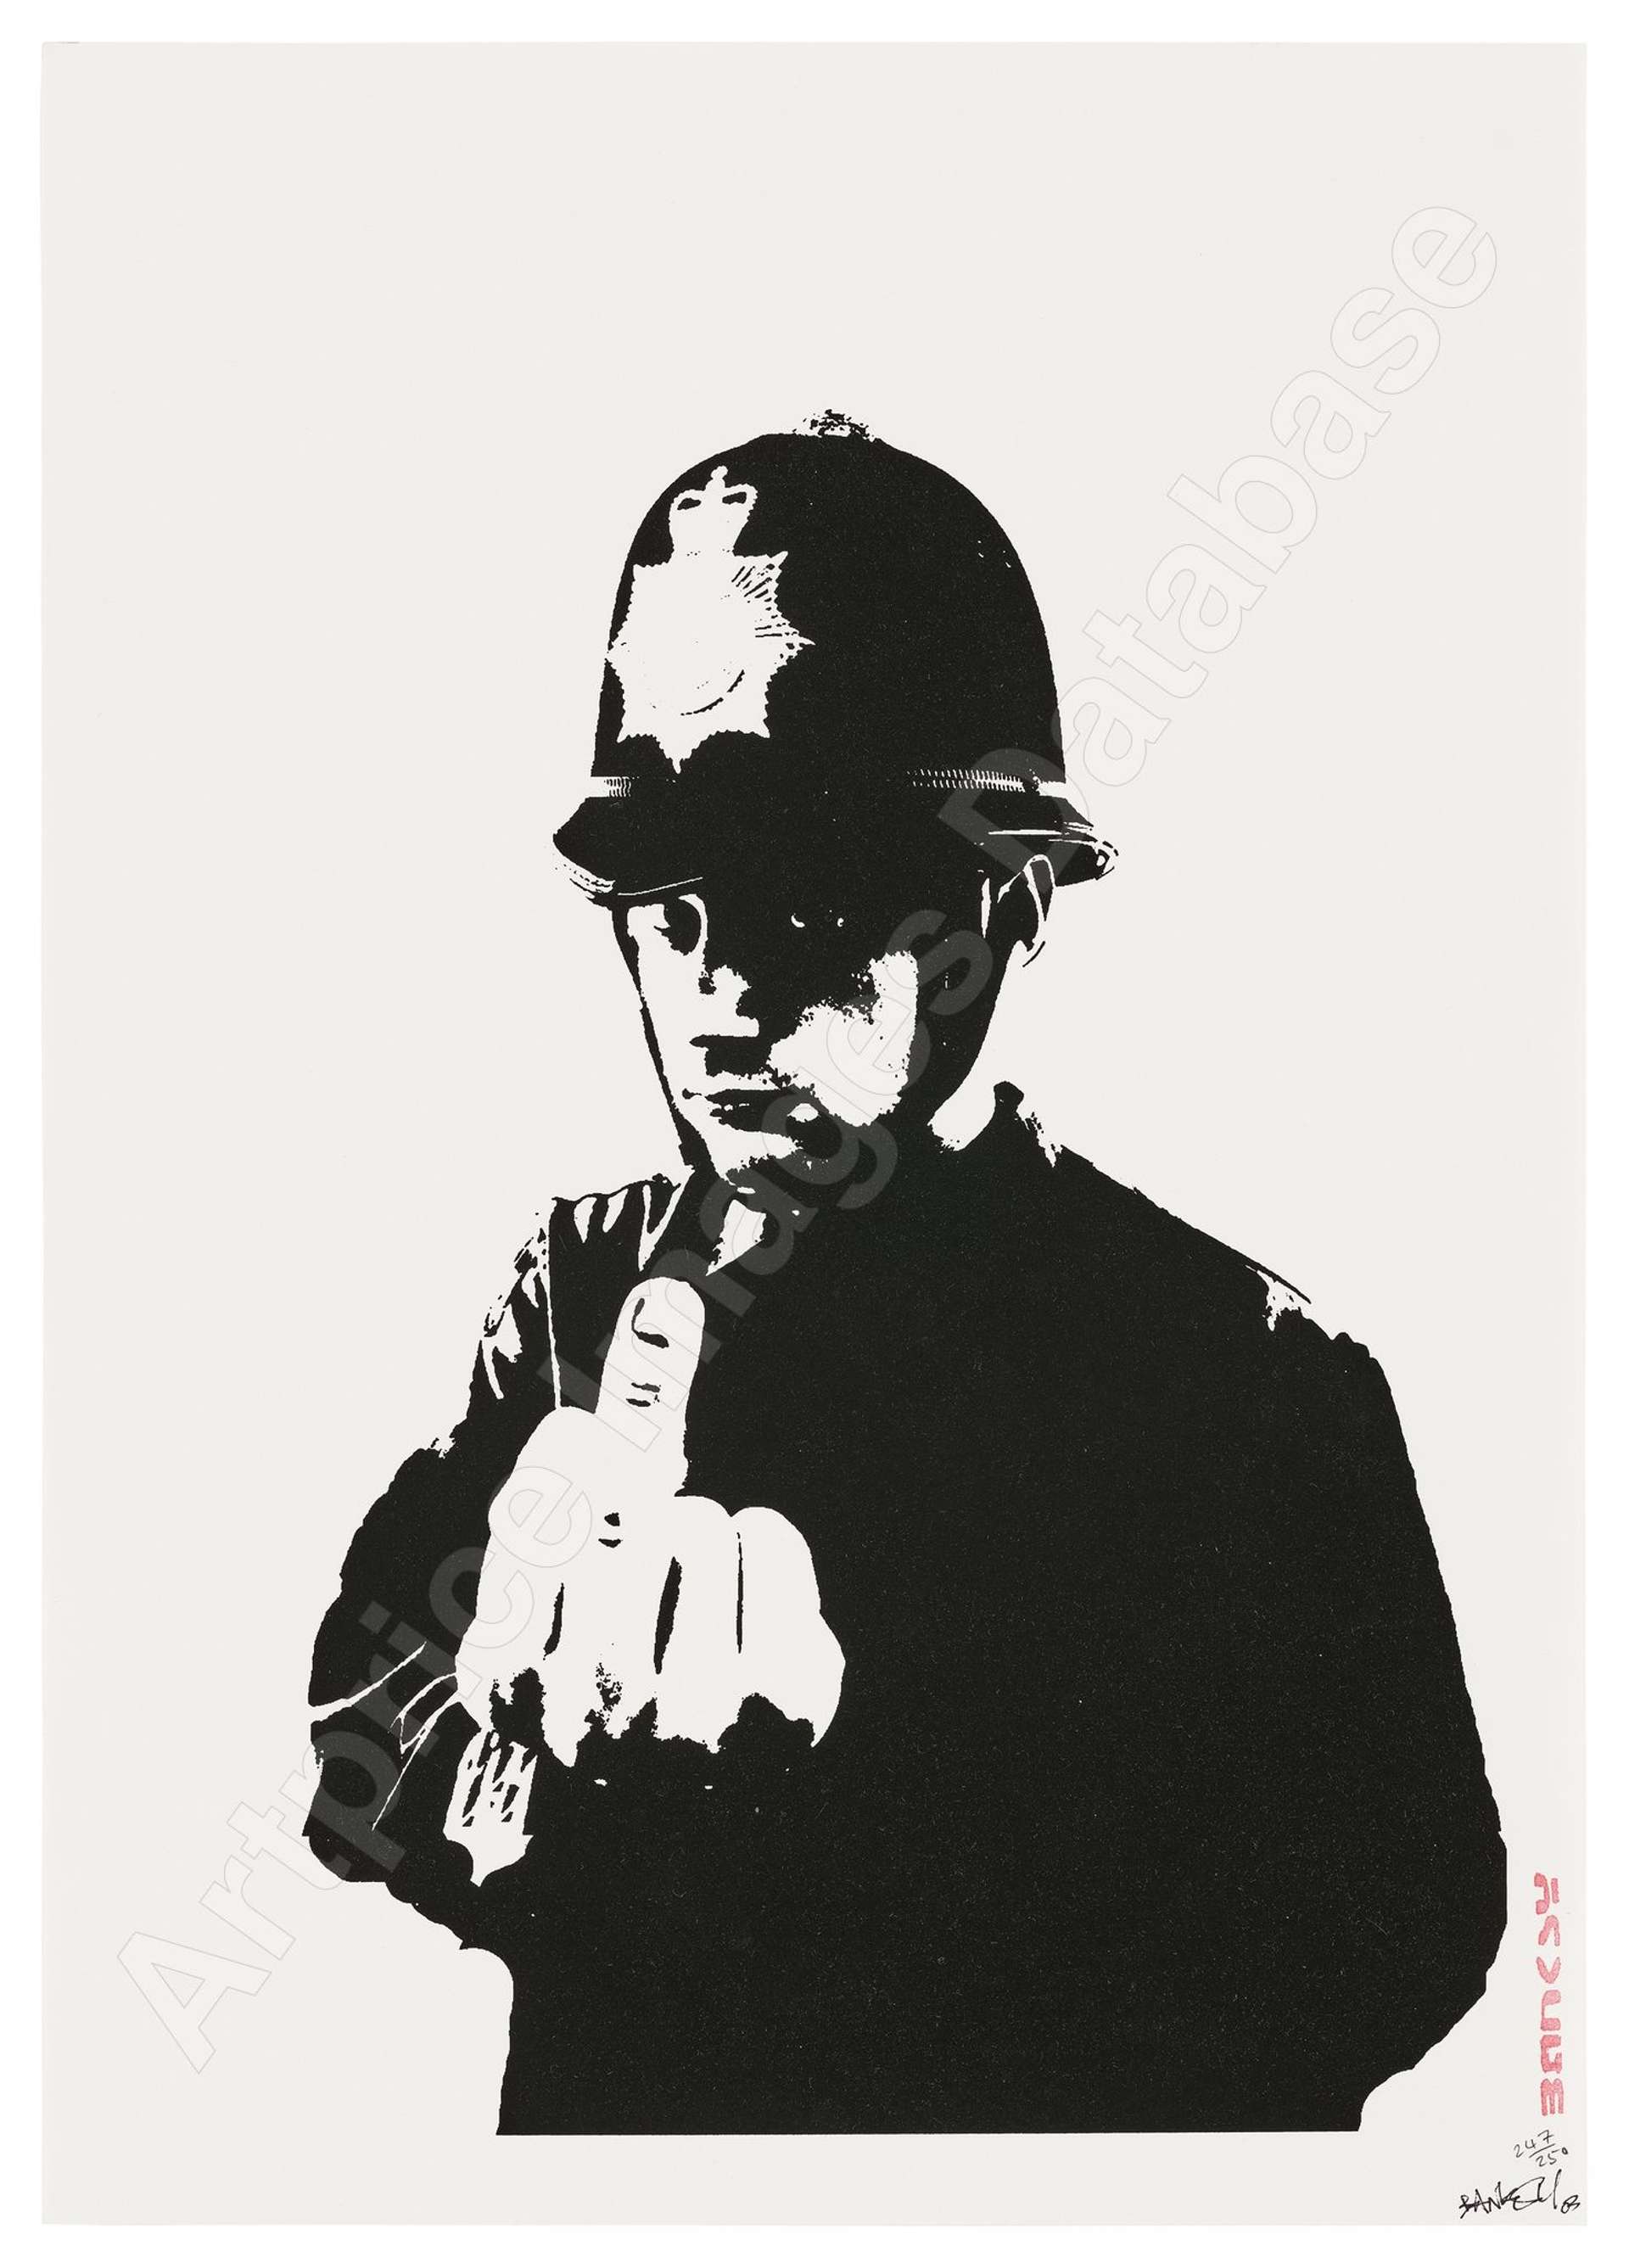  A black and white Banksy screenprint depicting a police officer in English police attire making an offensive hand gesture toward the viewer.